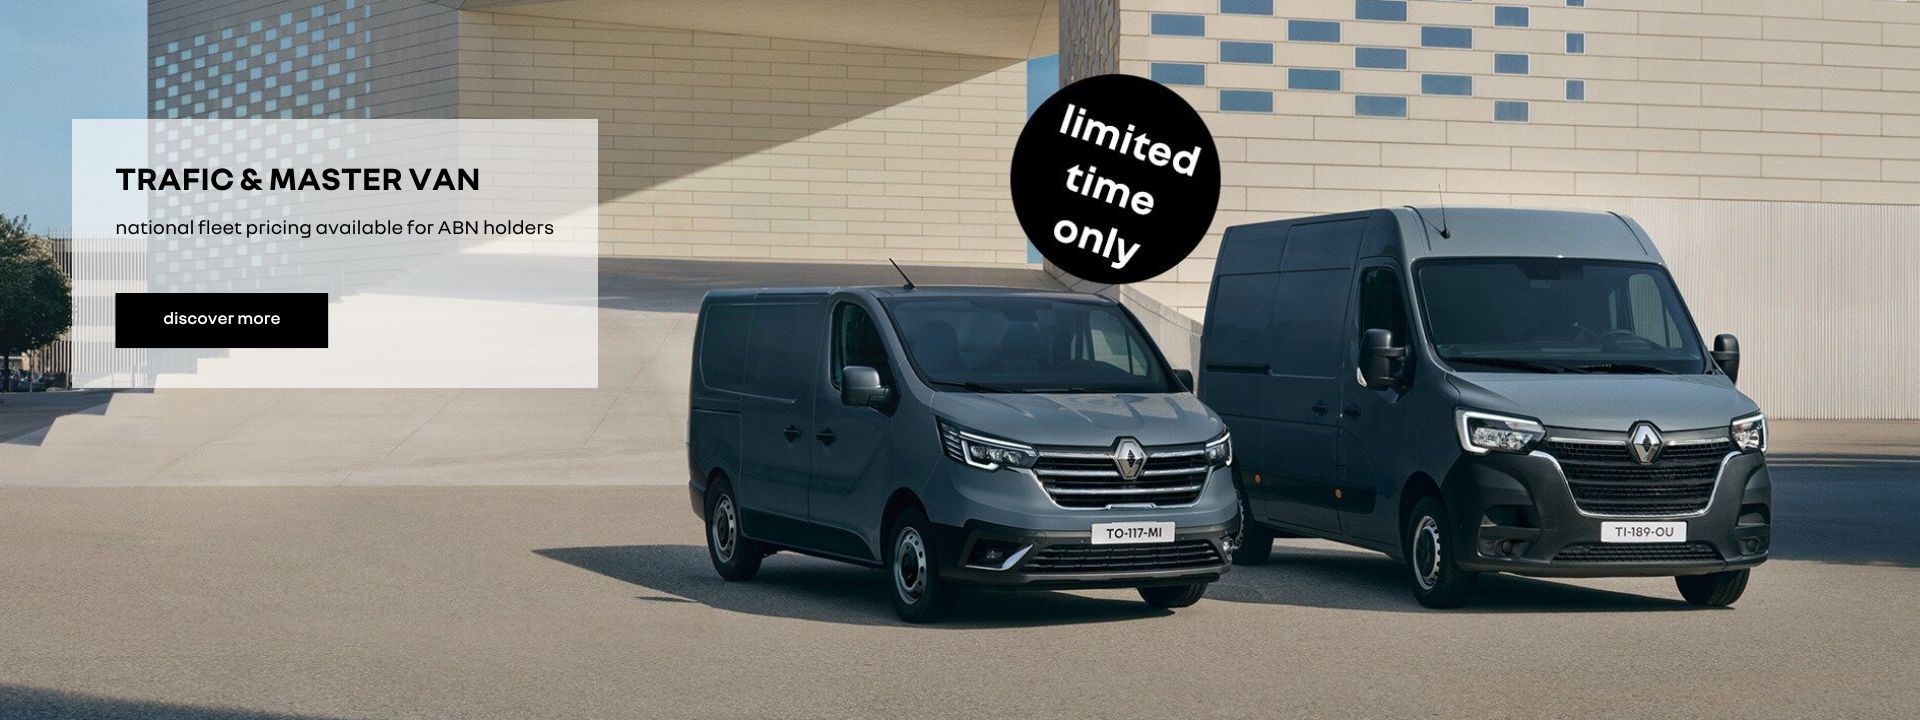 Trafic and Master Van. National fleet pricing available for ABN holders. Discover more.